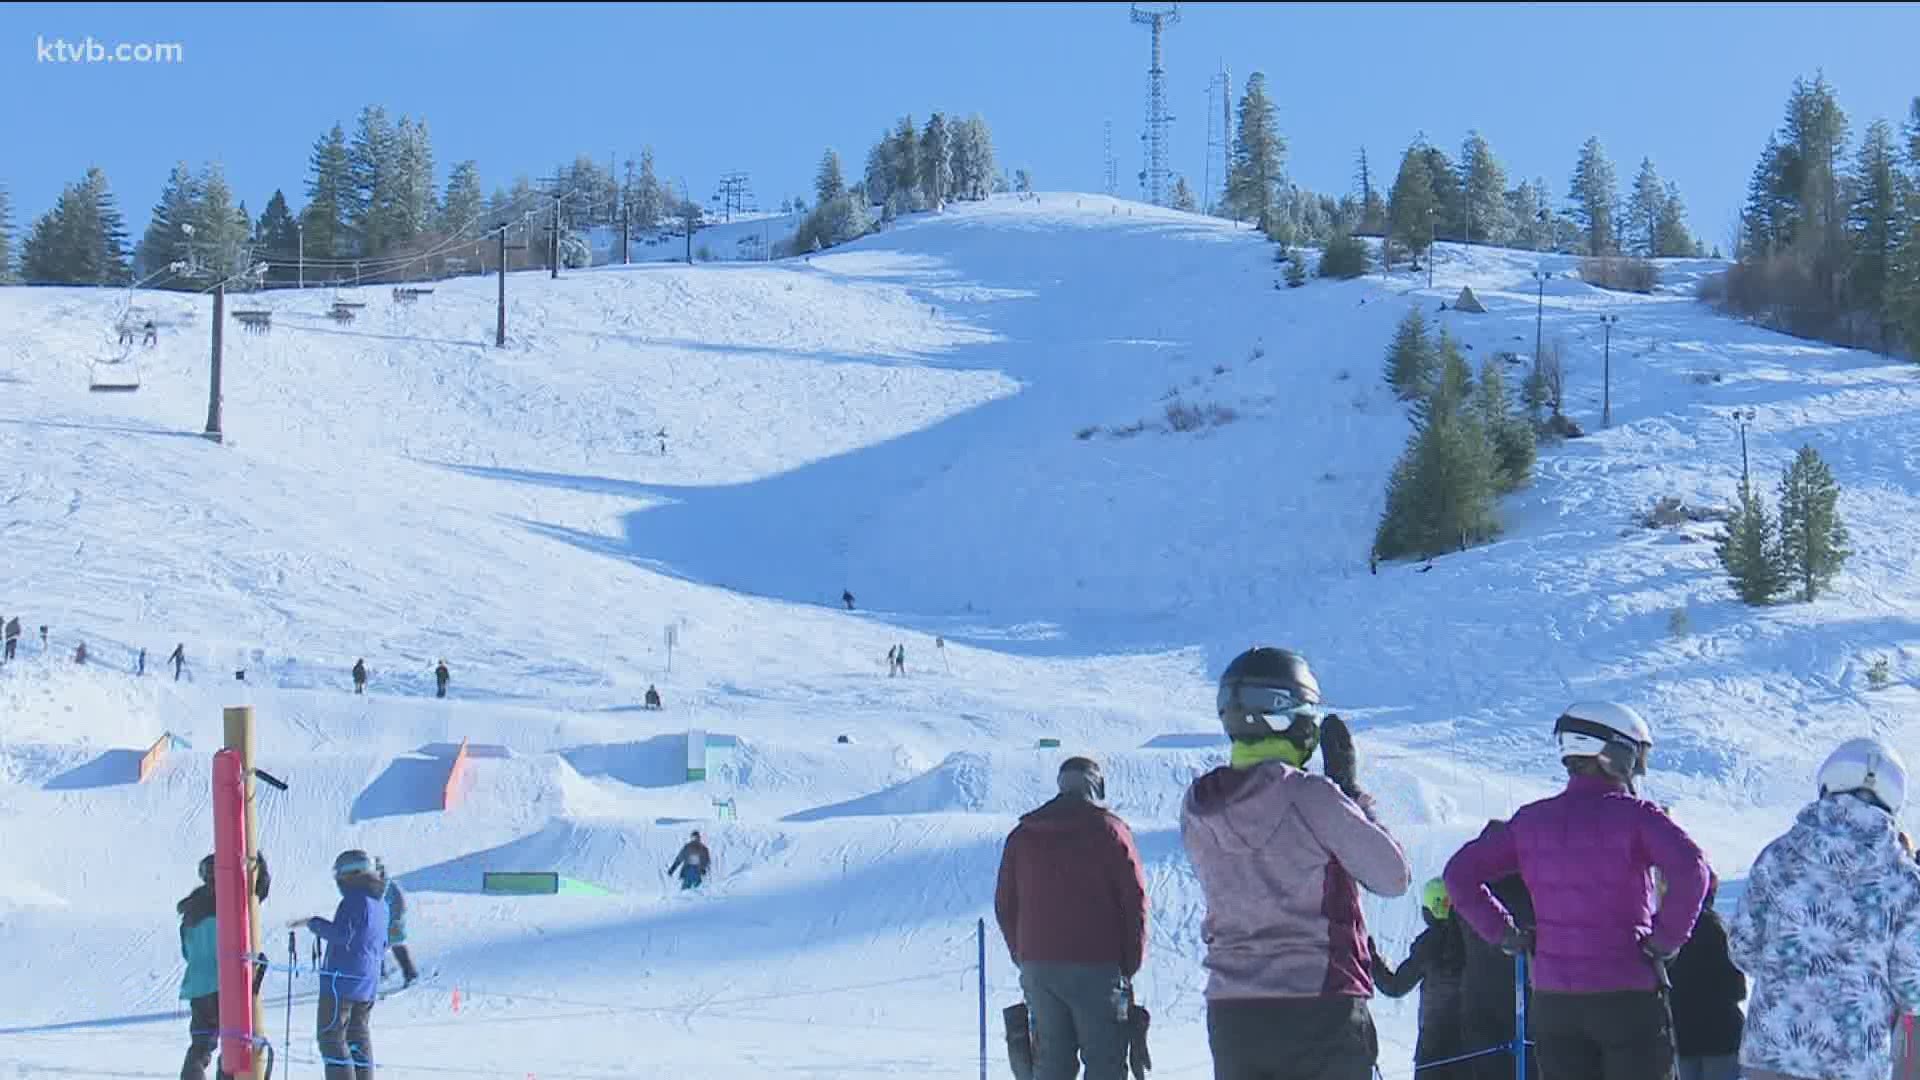 Both resorts want skiers and boarders to purchase their tickets in advance online.